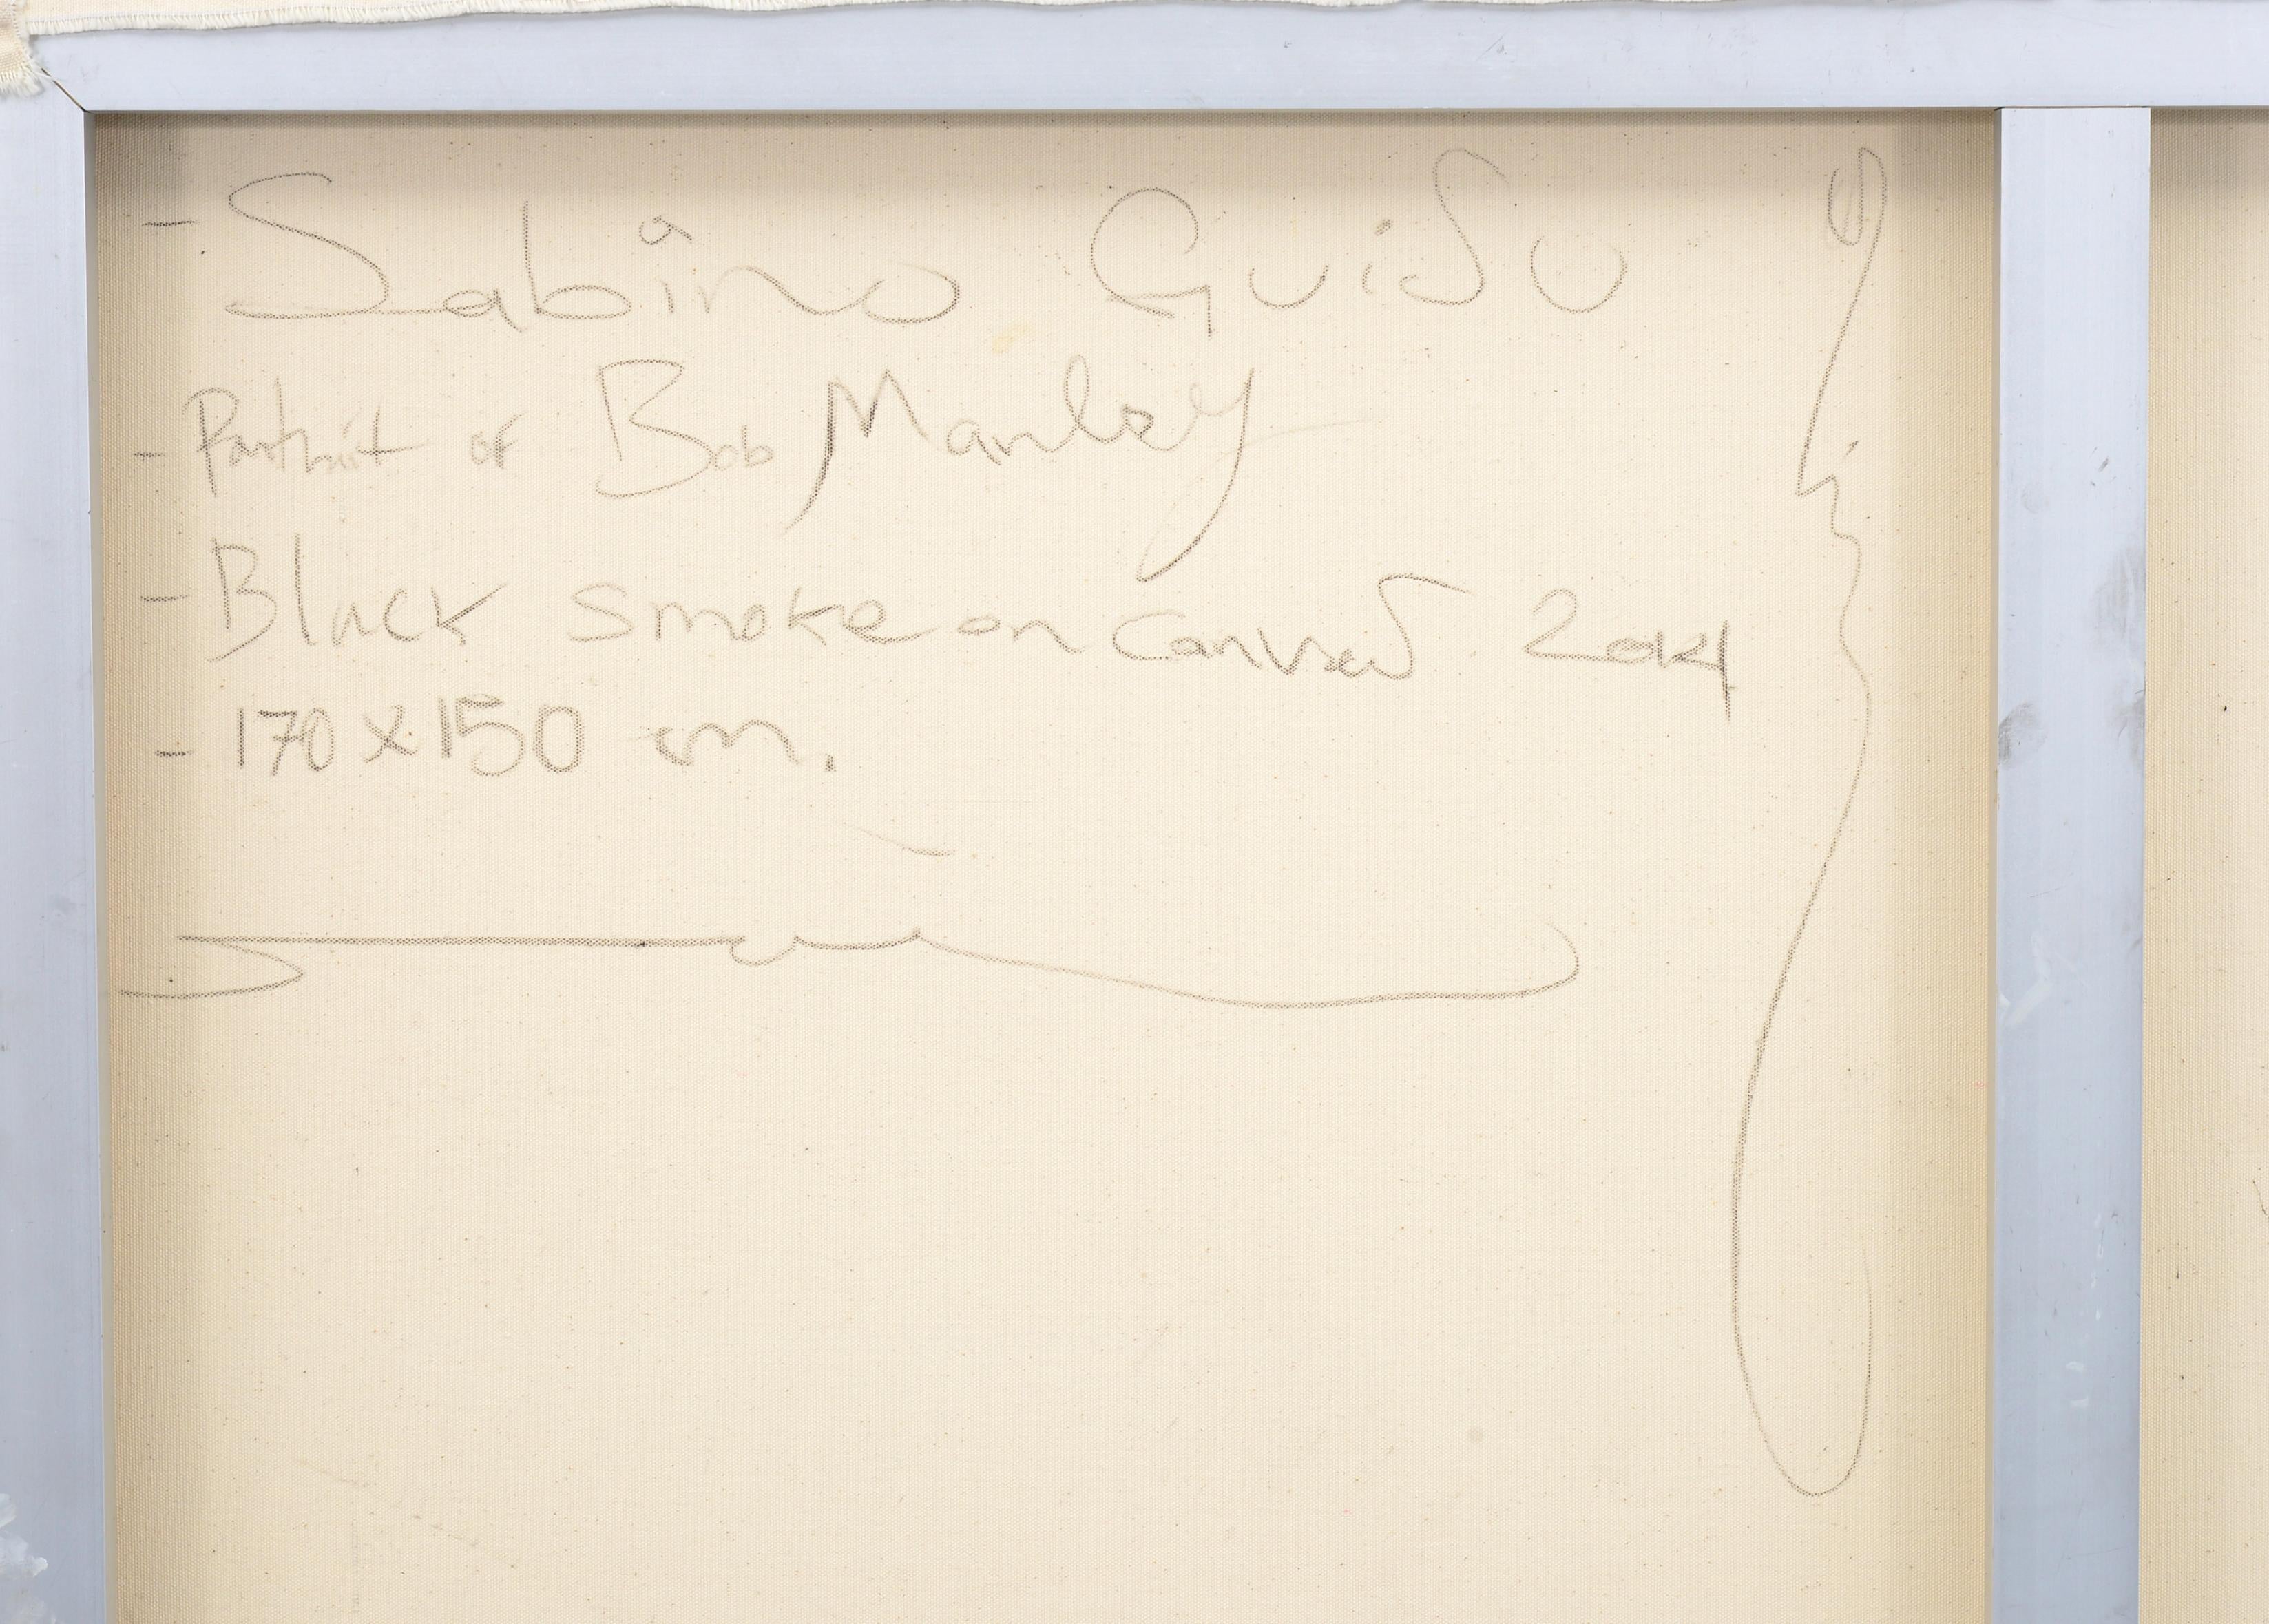 Additional Information: Work is titled “Portrait of Bob Marley”

Marking(s); notes: signed; 2014

Country of origin; materials: Mexico; black smoke on canvas